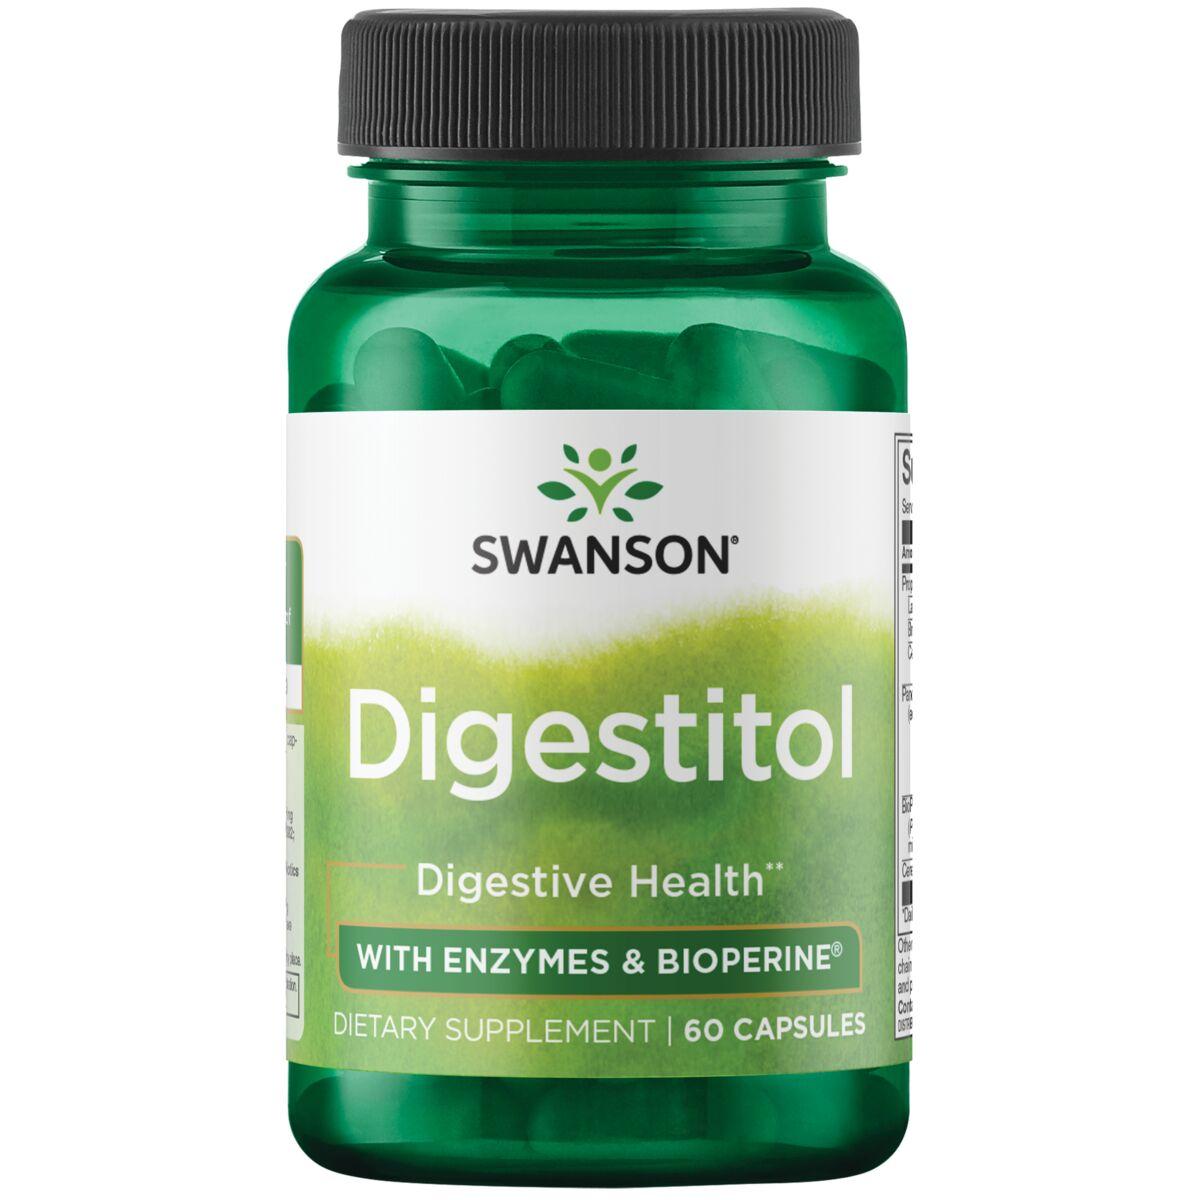 Swanson Ultra Digestitol with Enzymes & Bioperine Supplement Vitamin | 60 Caps